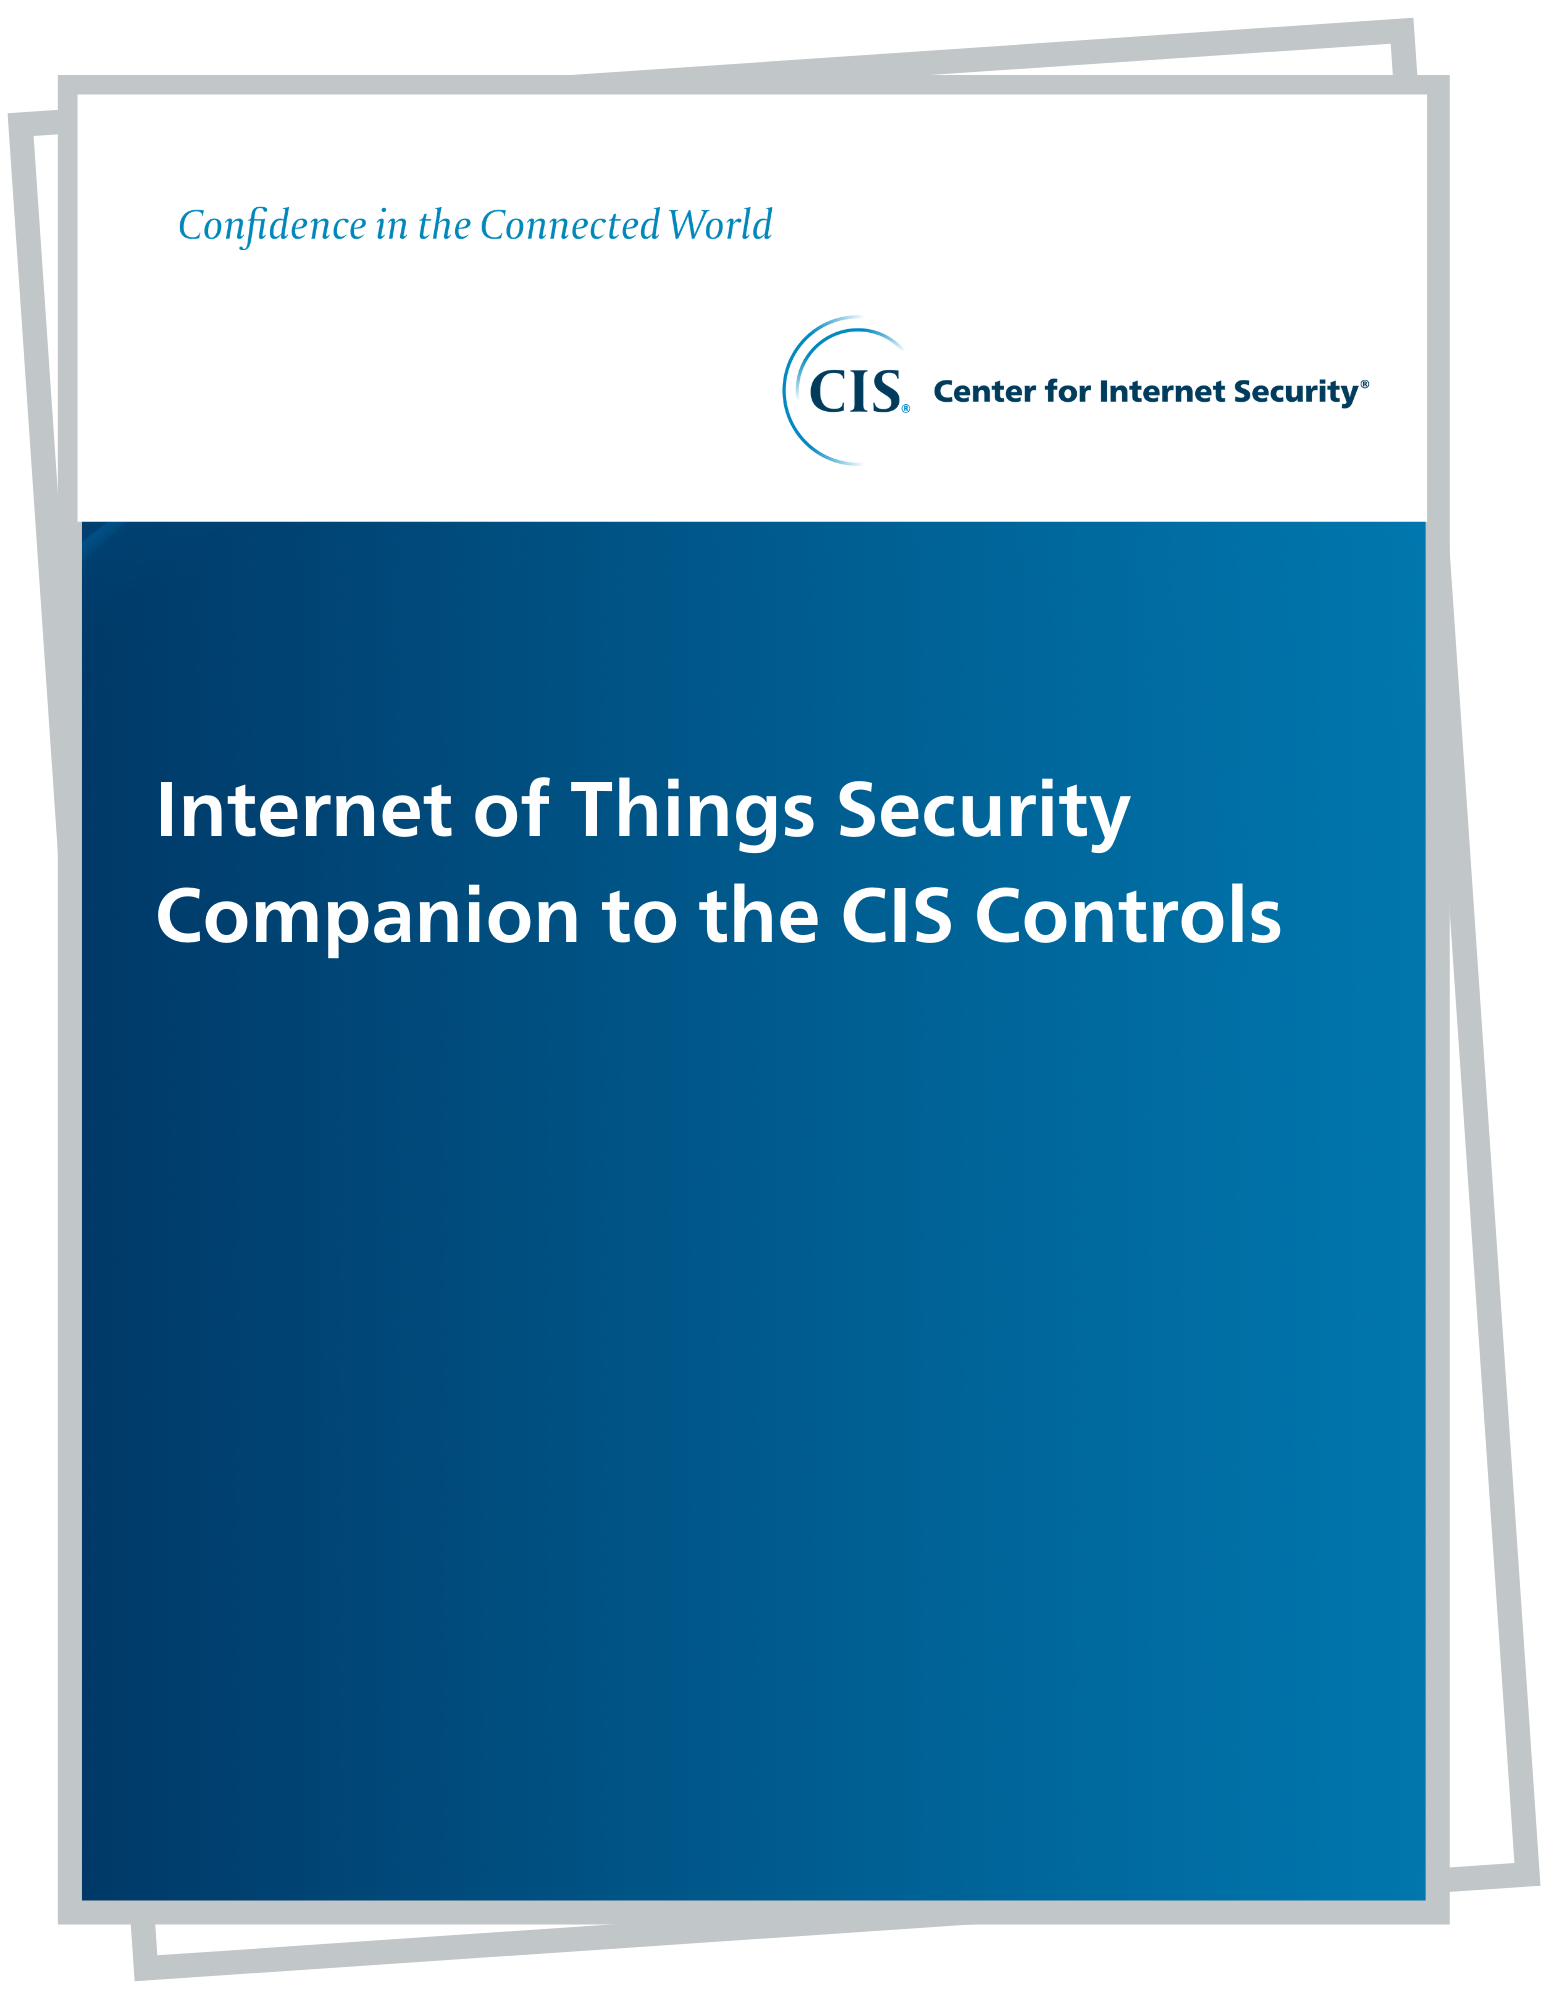 Internet-Things-Security-Companion-CIS-Controls